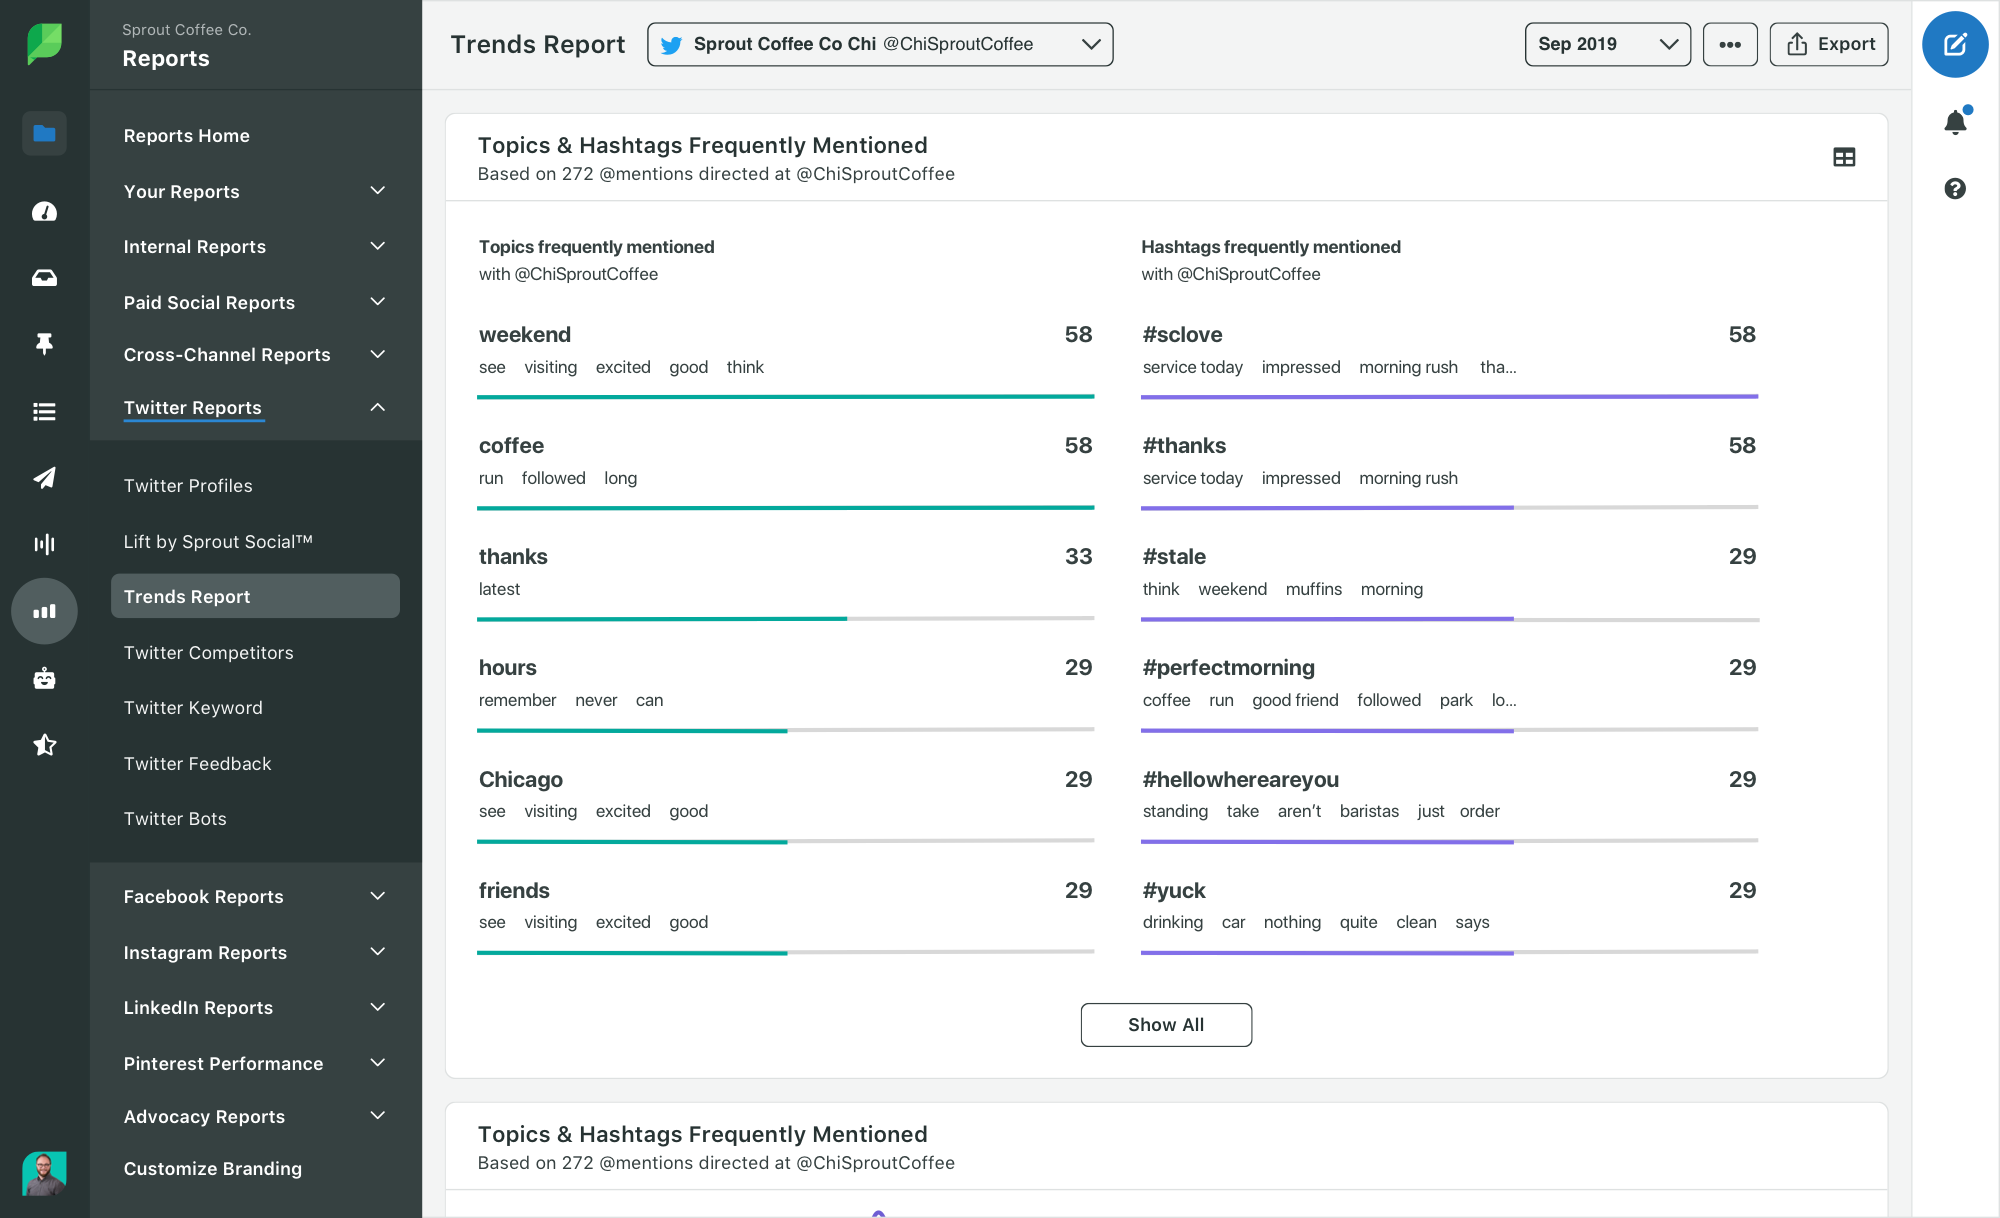 Sprout's Twitter Trend report shows which hashtags are most associated with your brand.